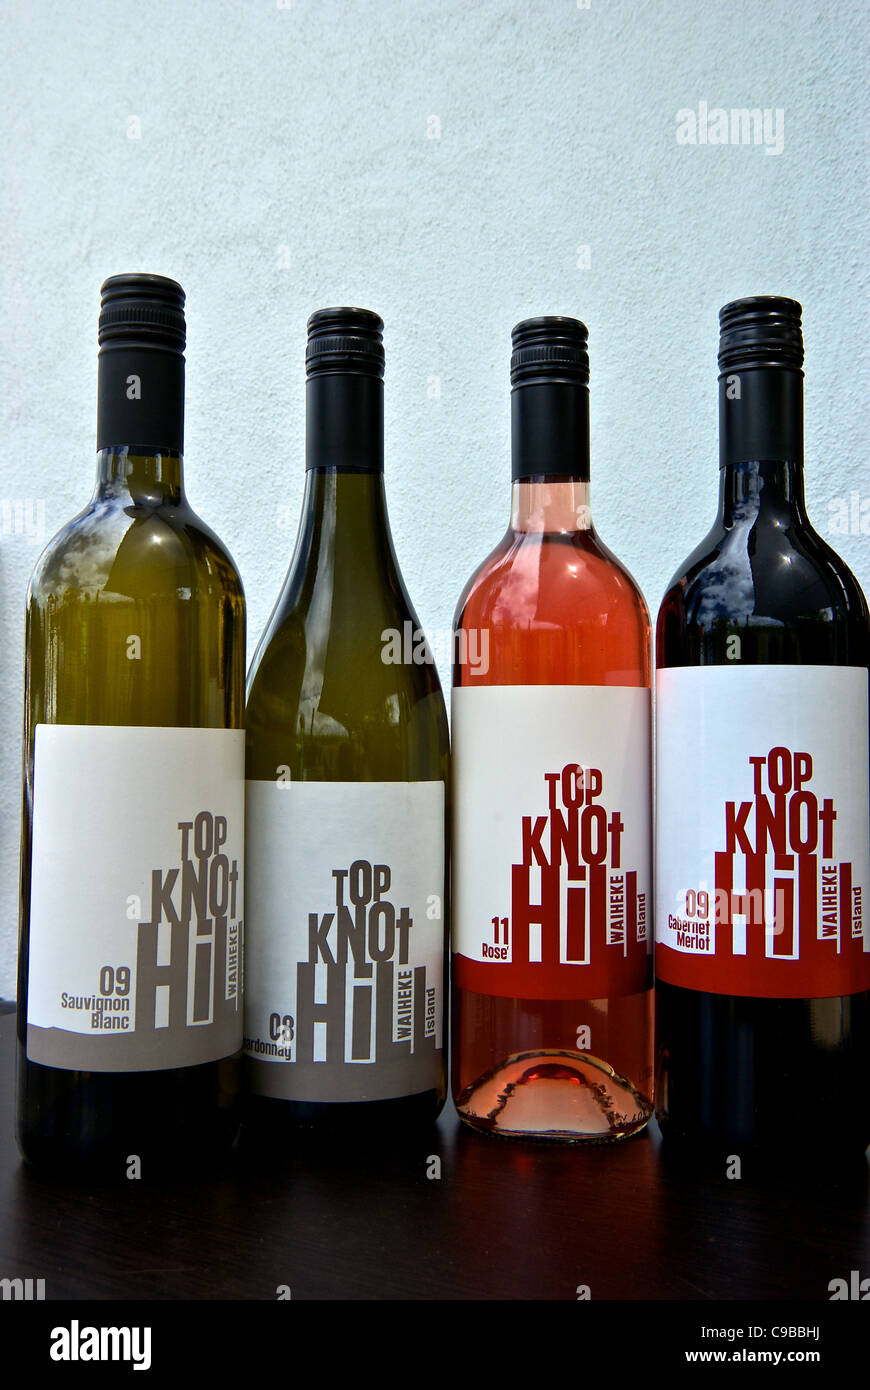 Four bottles of Top Knot Hill wine from Wild on Waiheke winery brewery restaurant Stock Photo